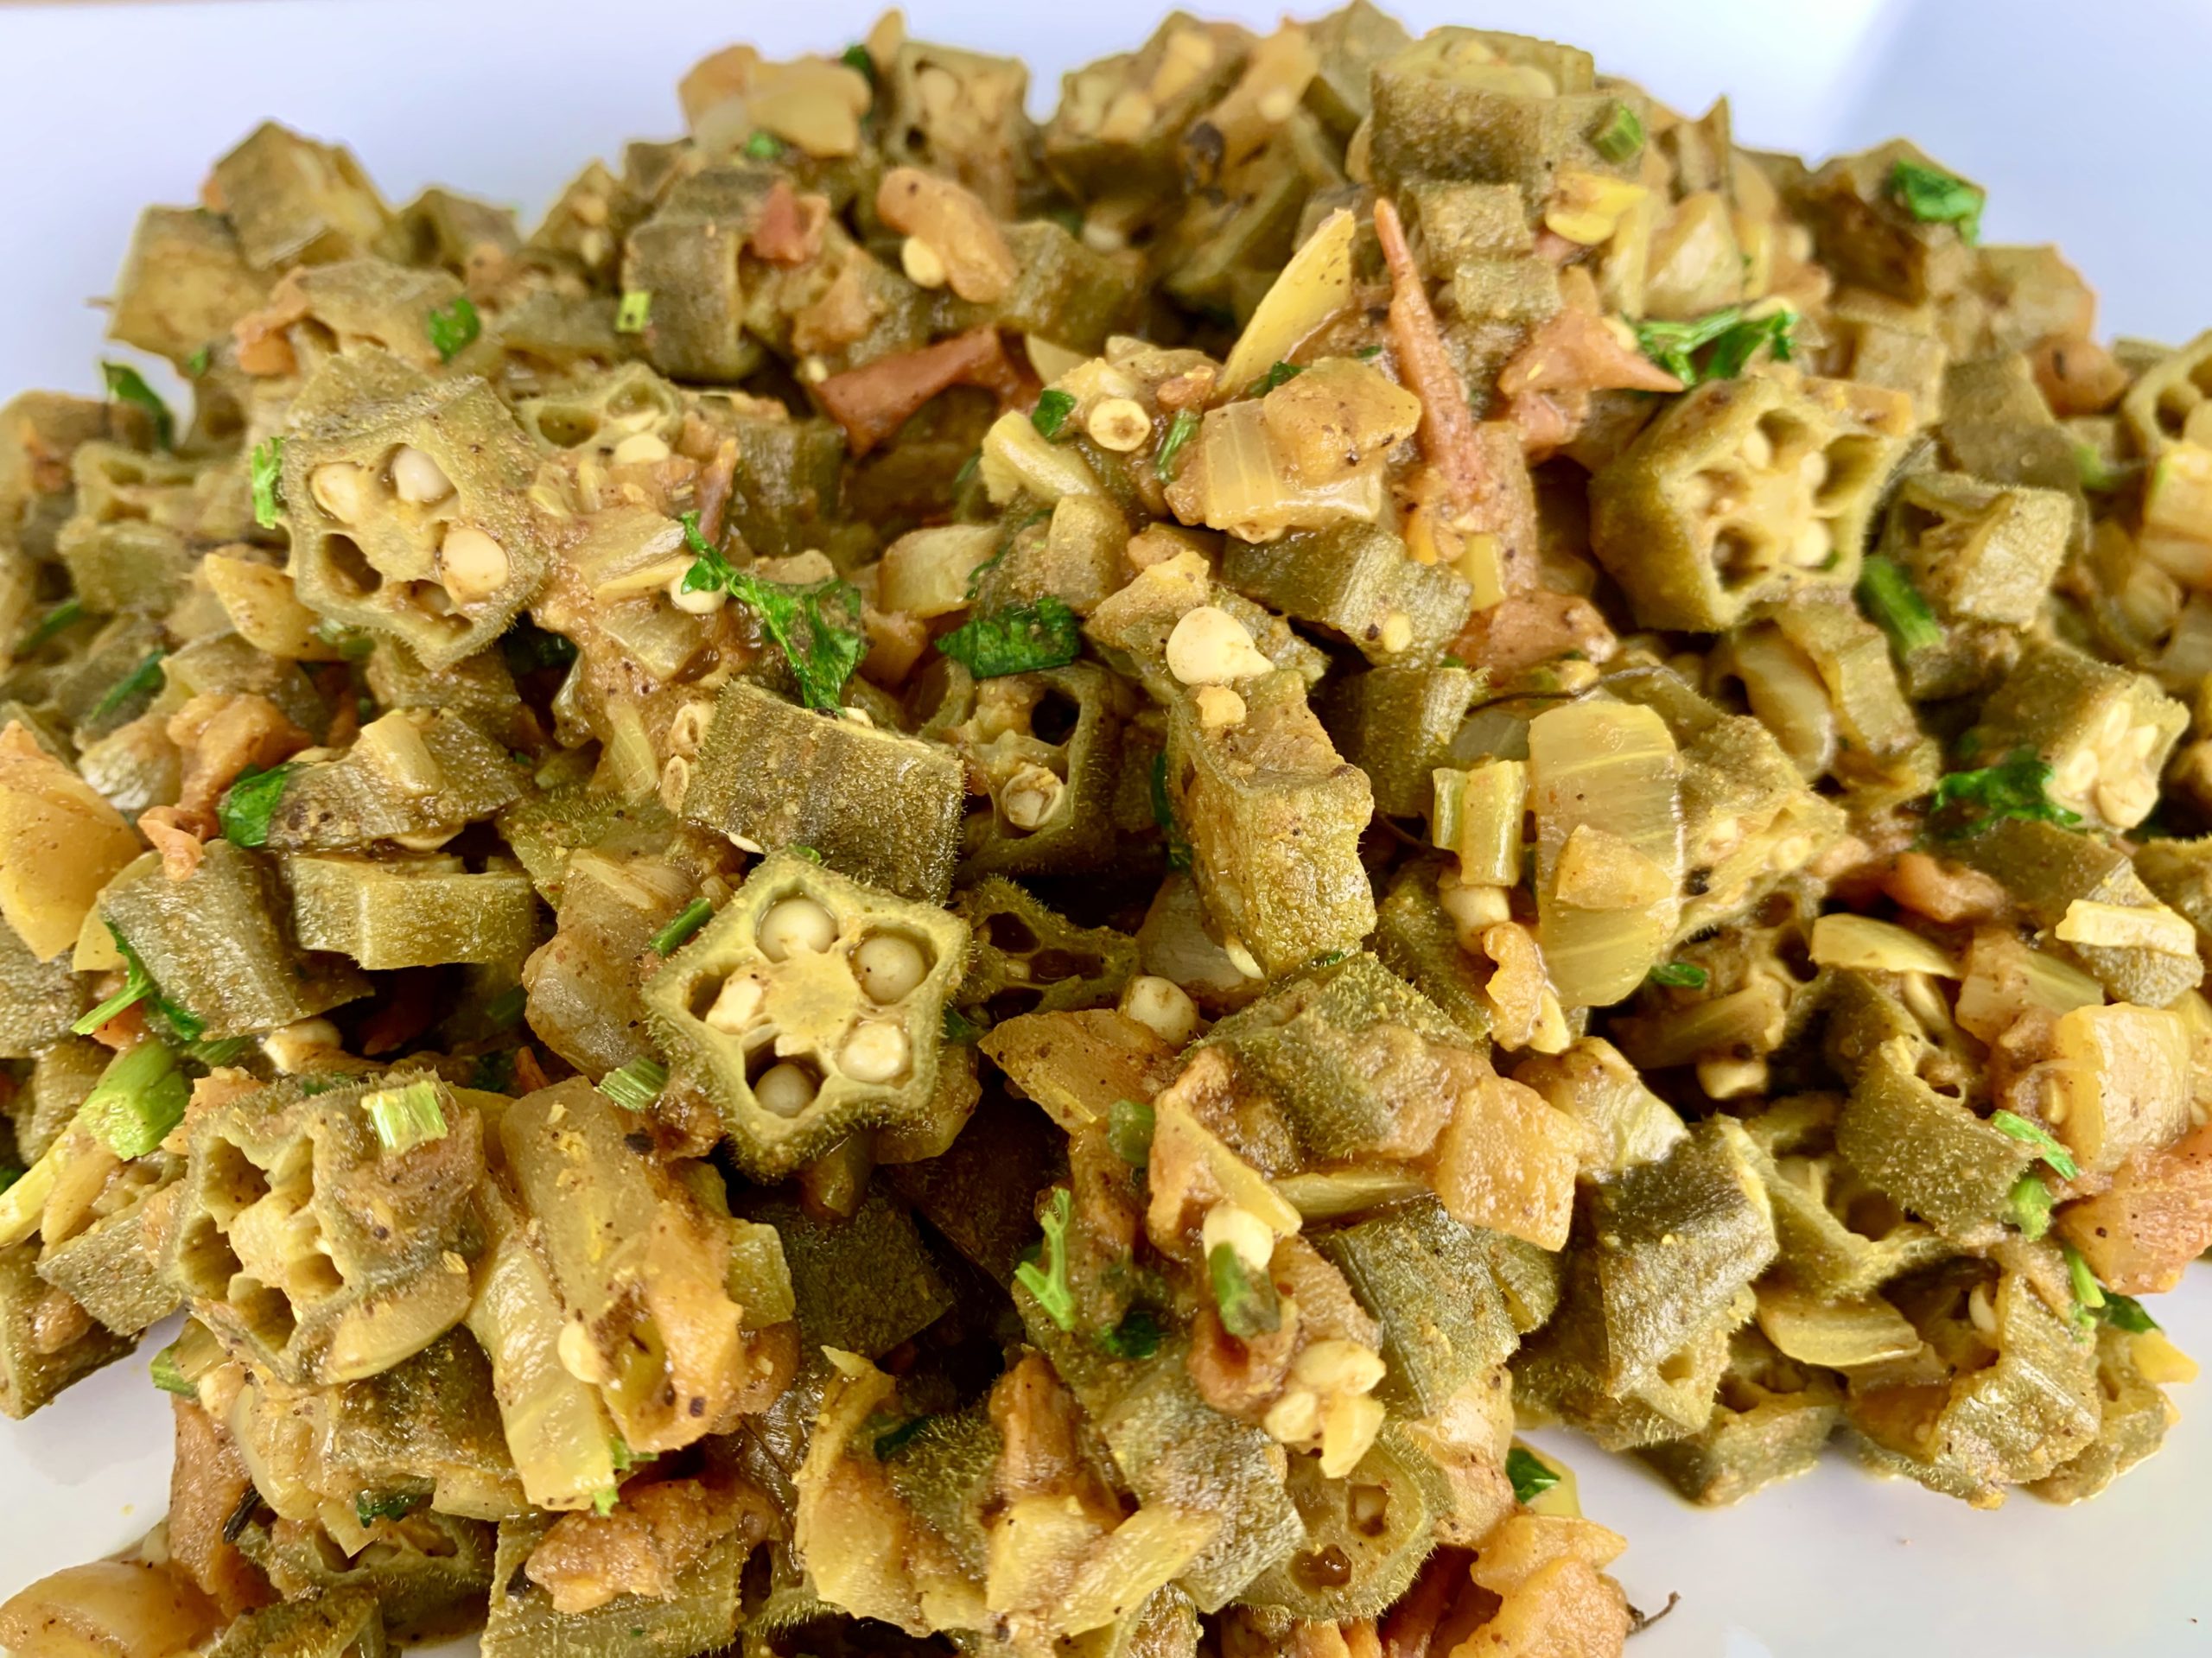 Bhindi Masala (Okra with Tomatoes, Onions and Spices)